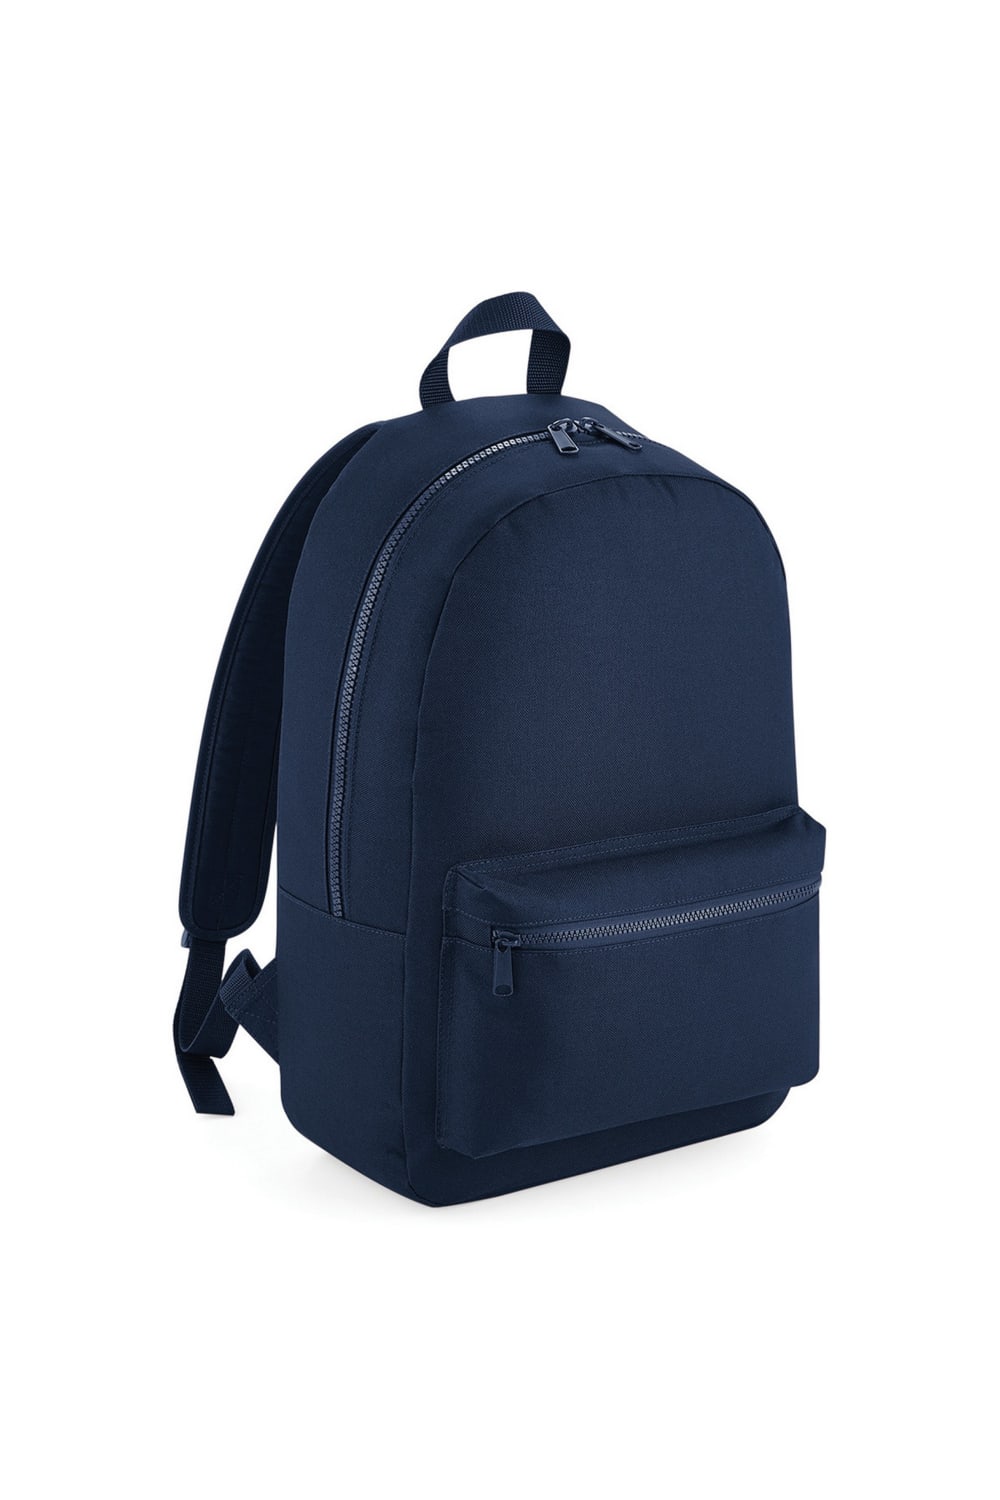 Bagbase Essential Tonal Knapsack Bag (Pack of 2) (French Navy) (One Size)